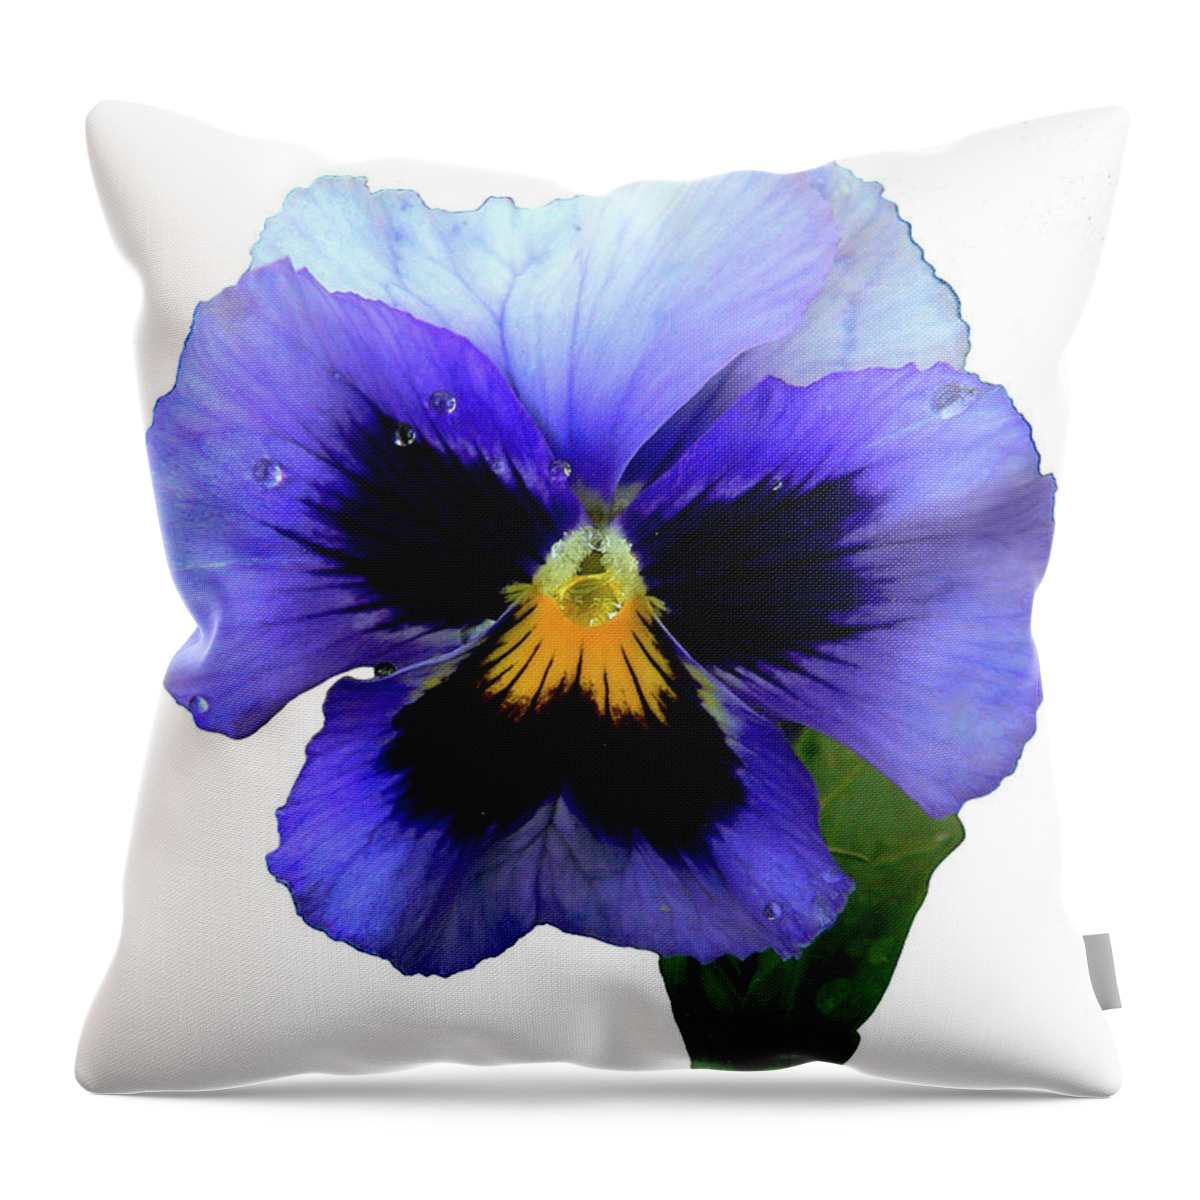 Blue Throw Pillow featuring the photograph Statuesque by Doug Norkum